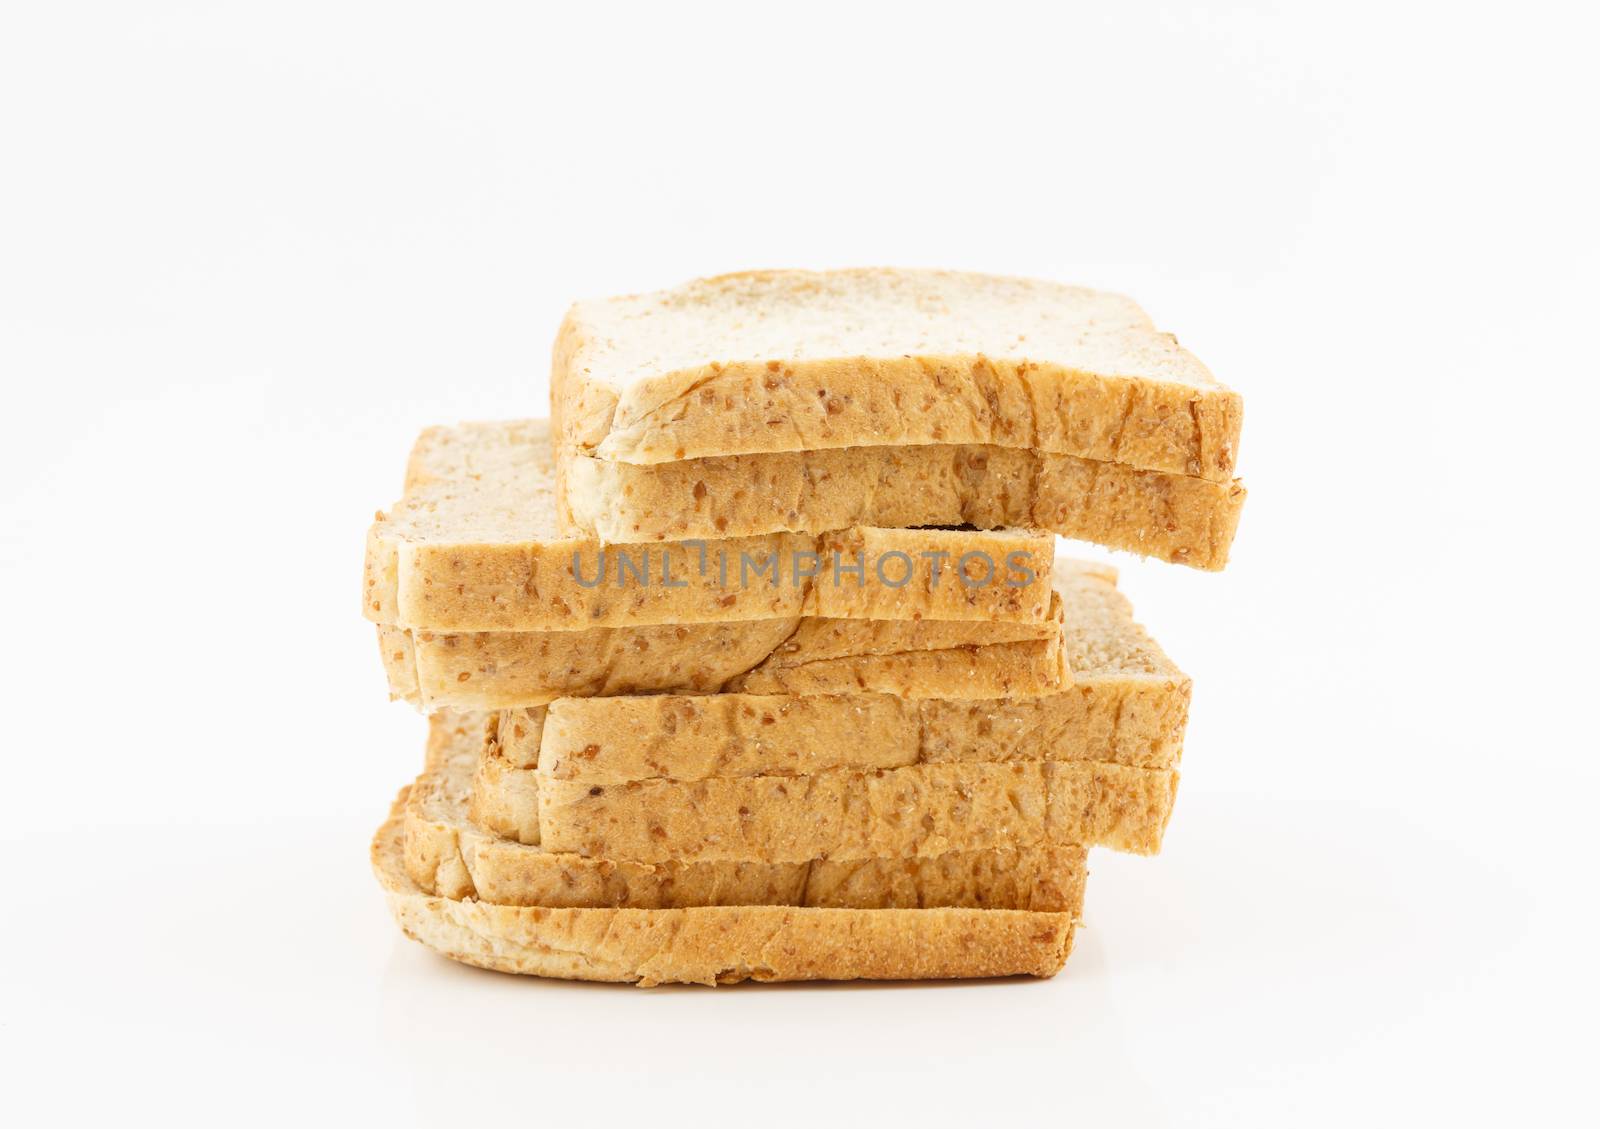 Whole wheat bread on white background by vitawin